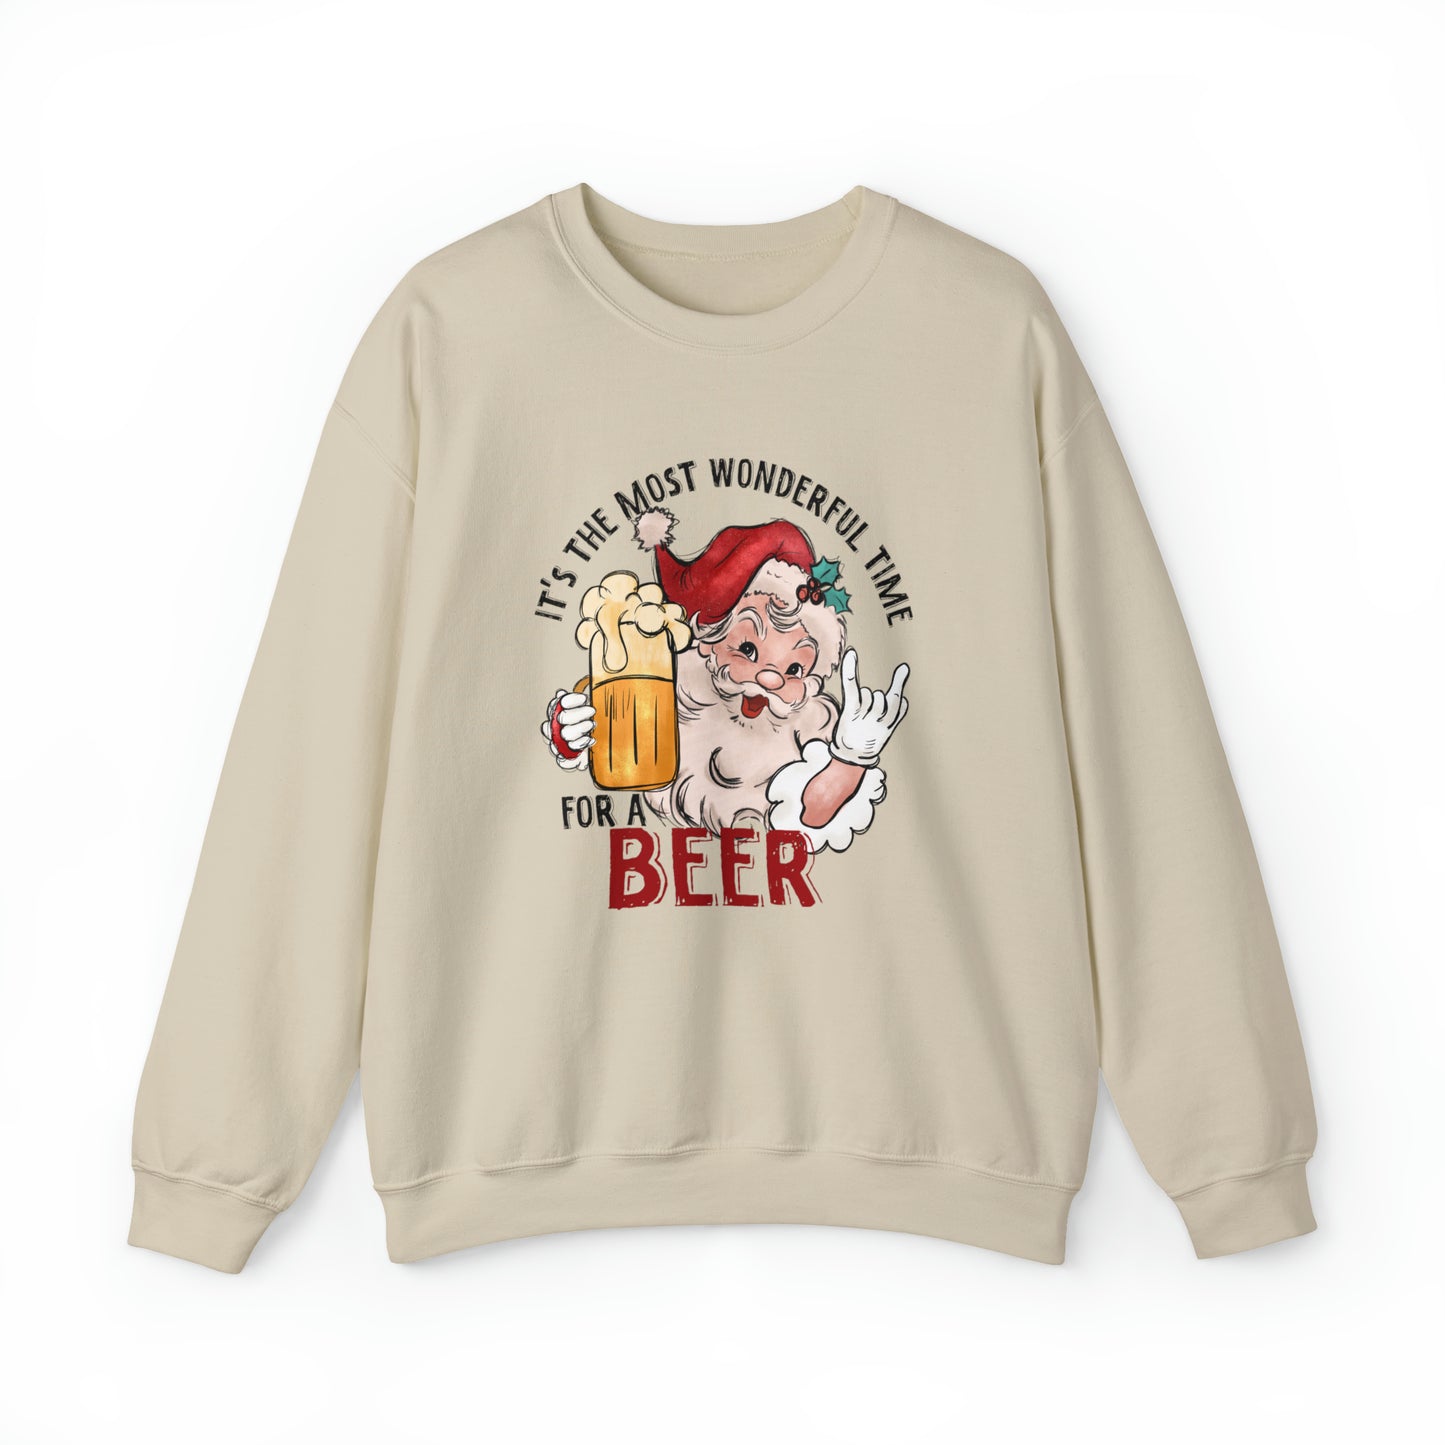 It's the most wonderful Time For a Beer Christmas Sweatshirt| Funny Santa Christmas Sweater